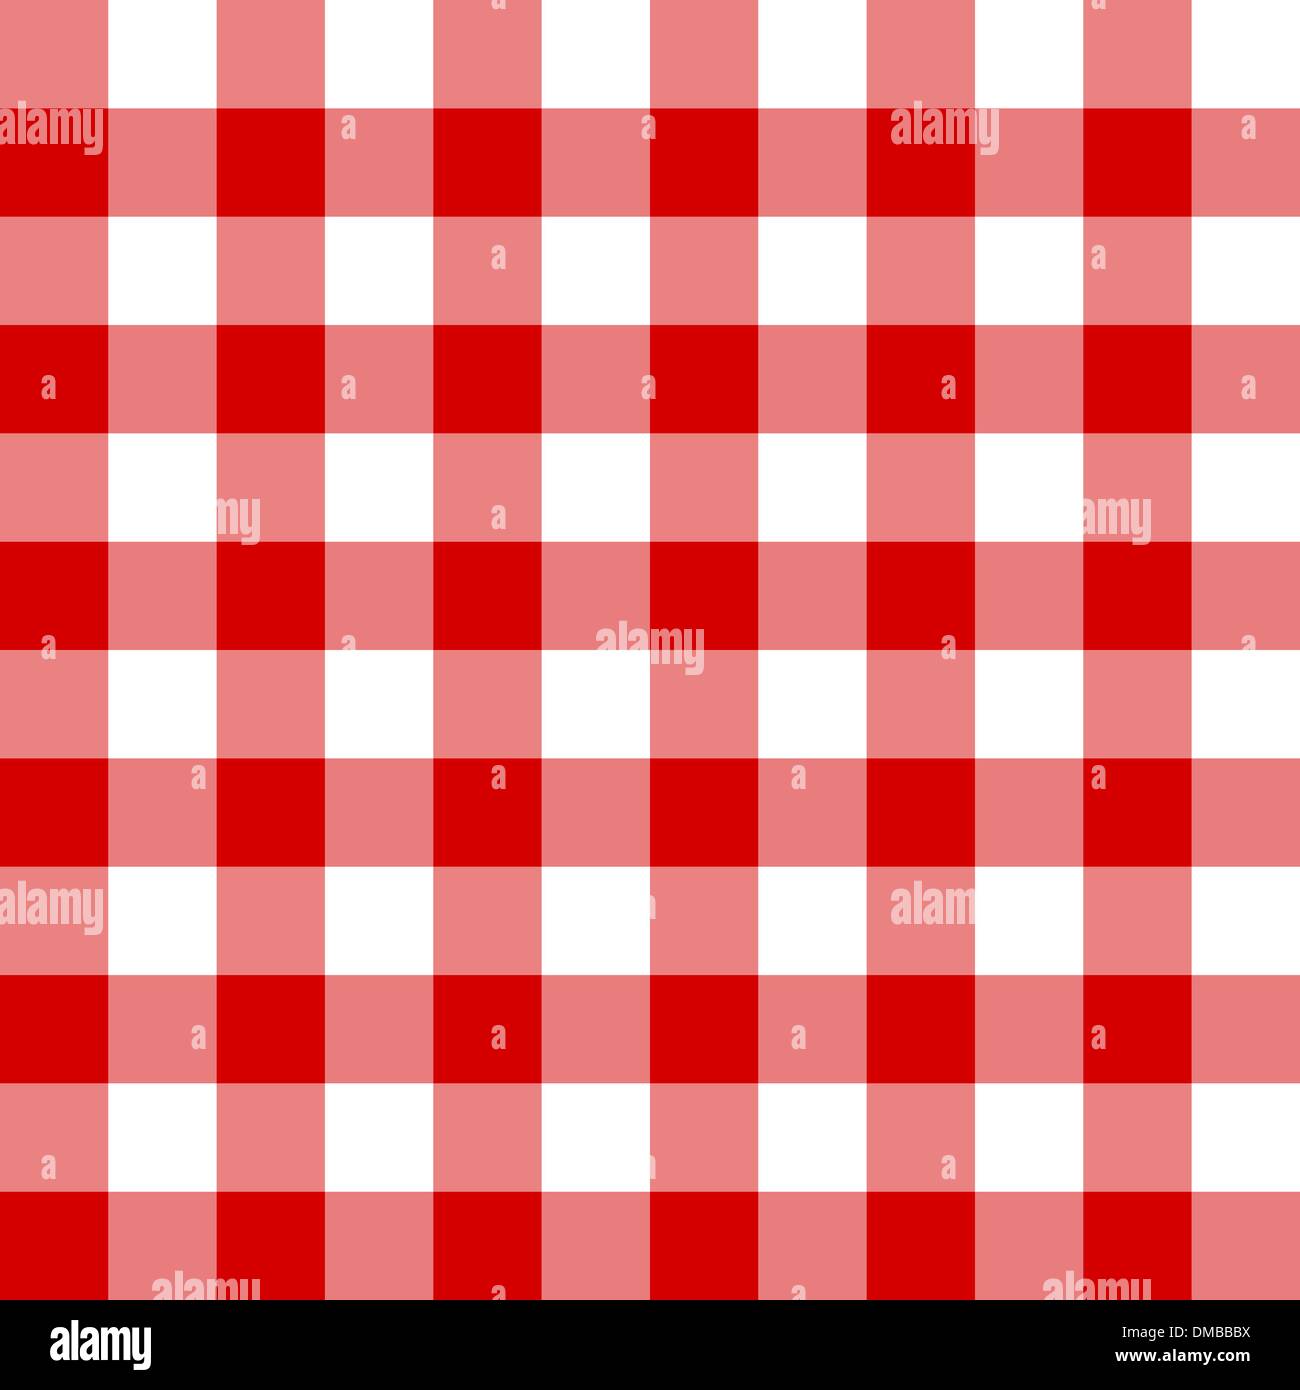 Seamless red and white cell pattern Stock Vector